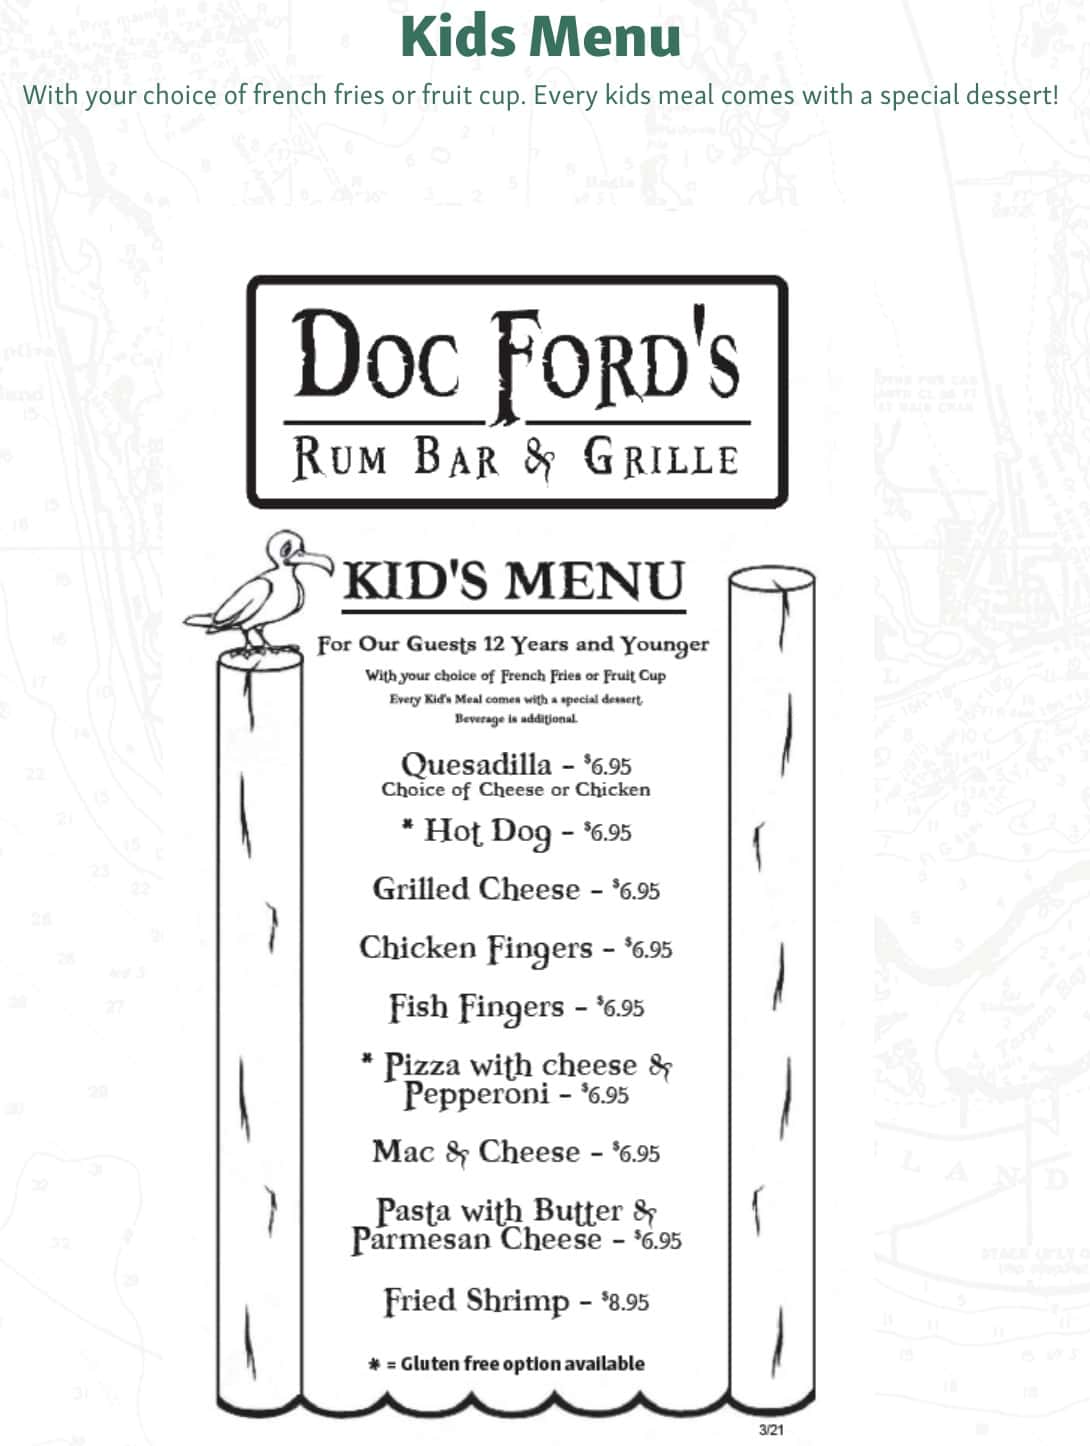 Doc Ford's Rum Bar and Grille Kids Menu